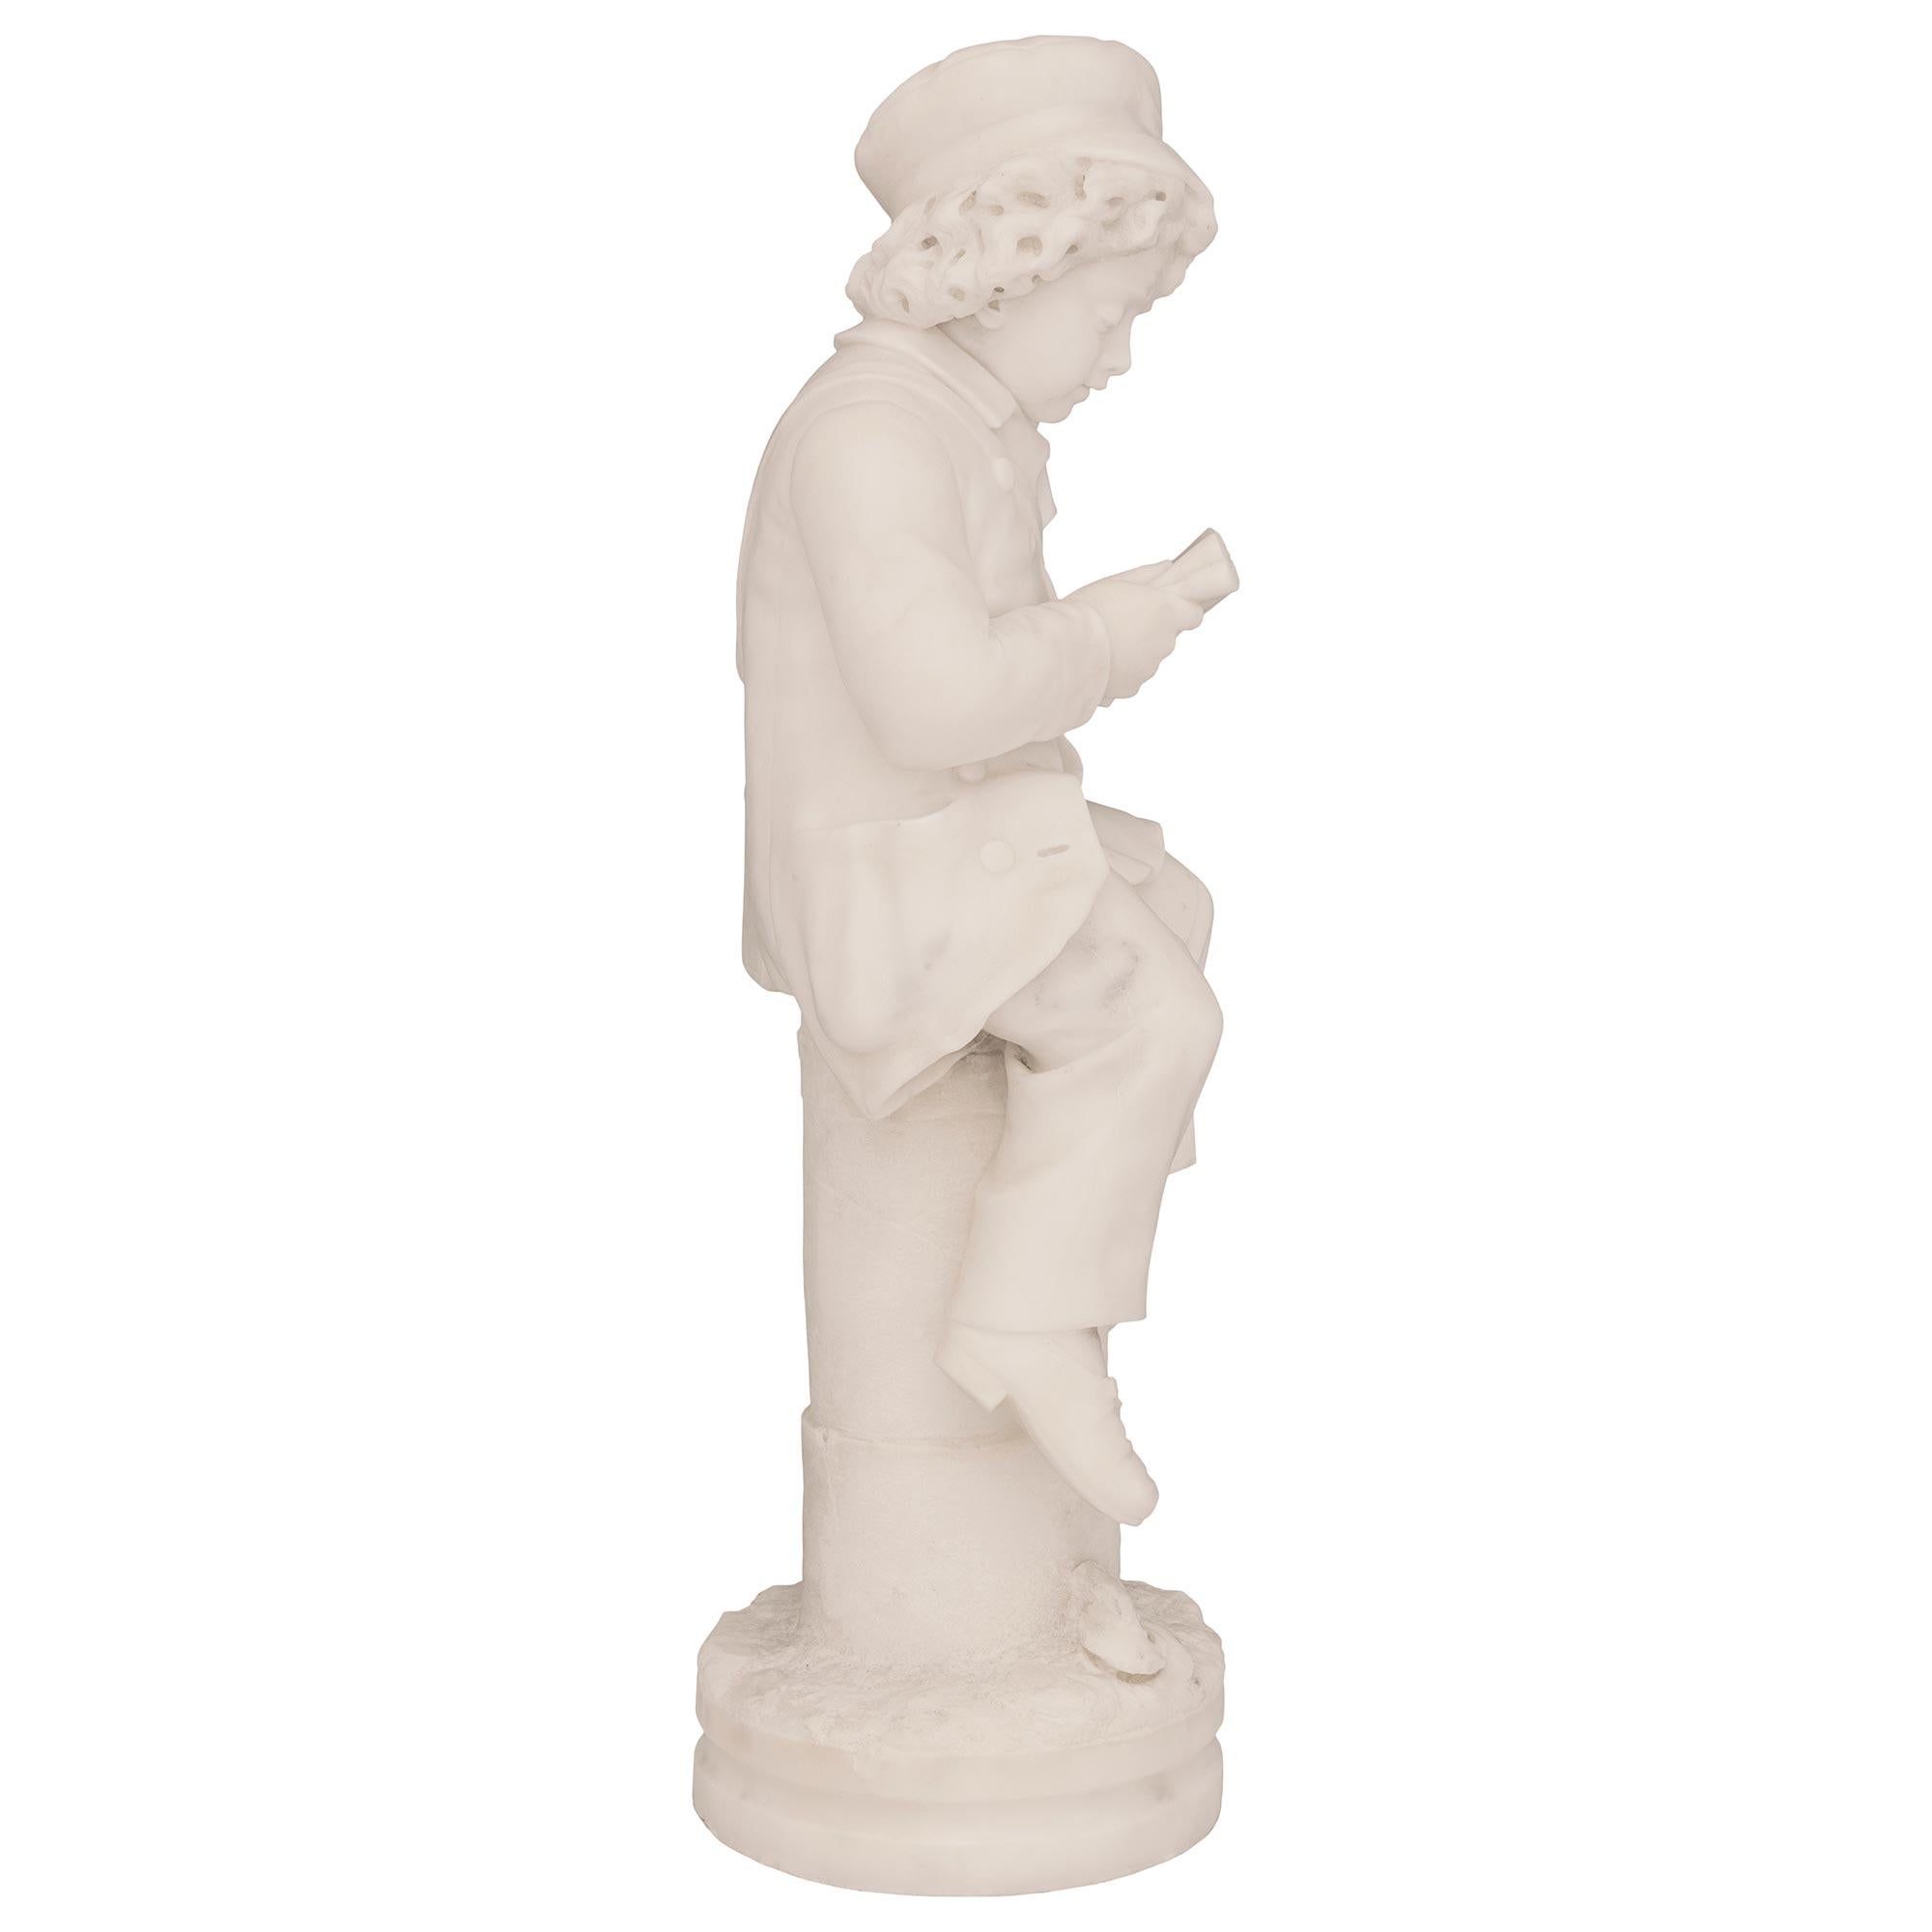 Italian 19th Century White Carrara Marble Statue of a Young Boy Reading a Book For Sale 1